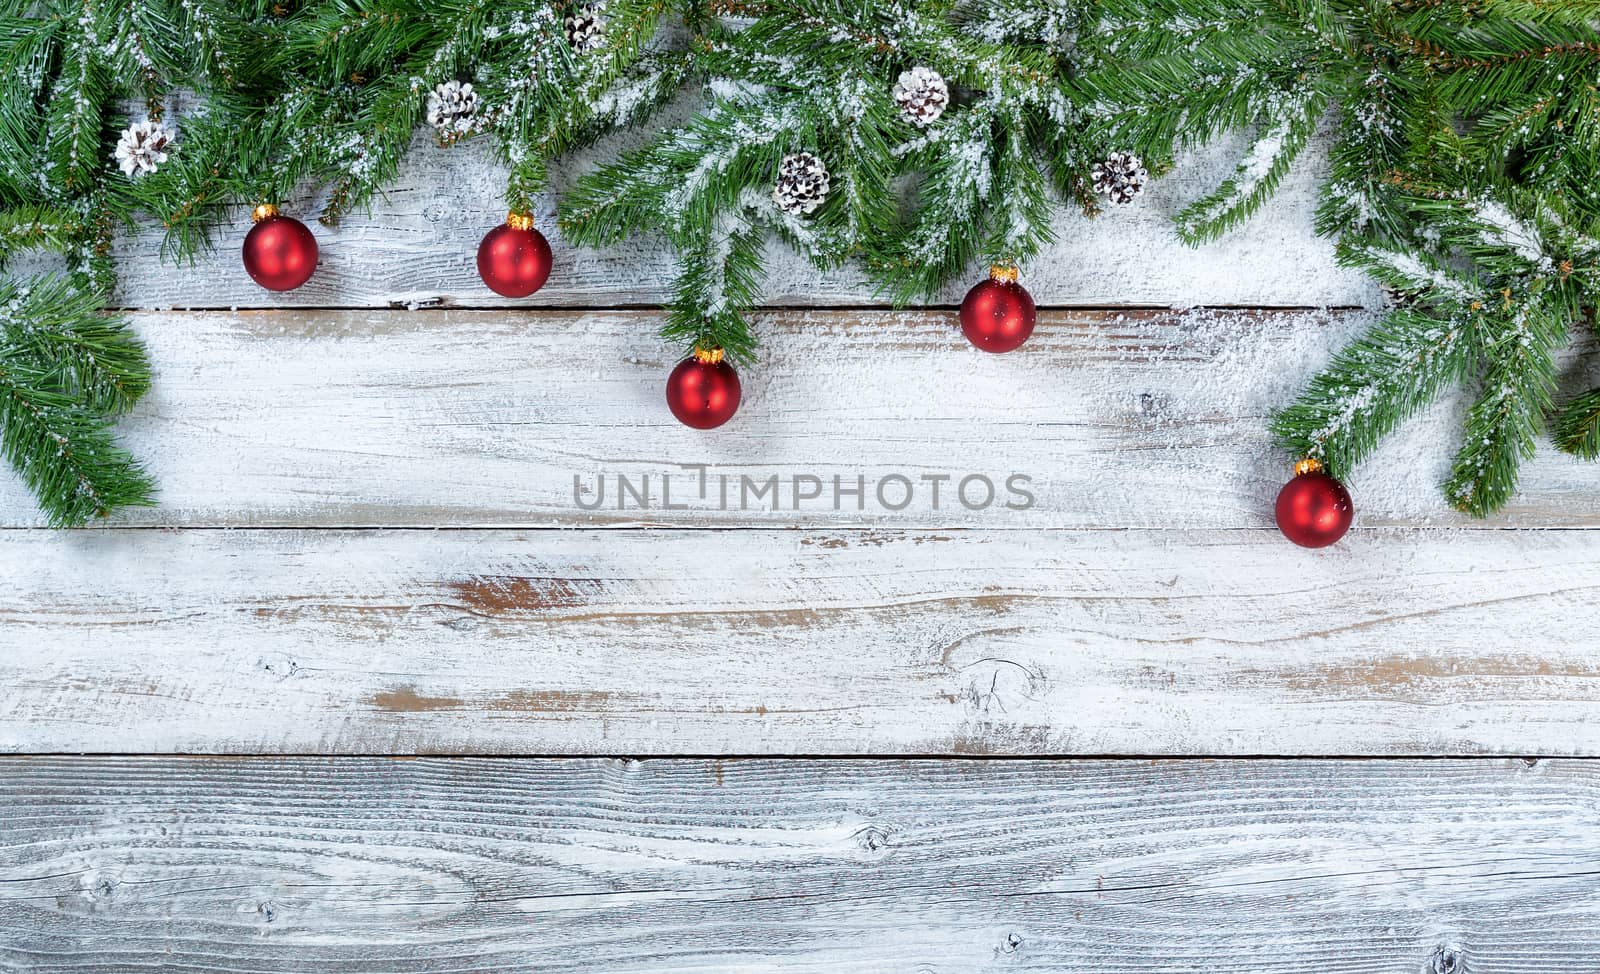 Snowy Christmas fir branches with traditional red ball ornaments and pine cones on rustic wood in flat lay format